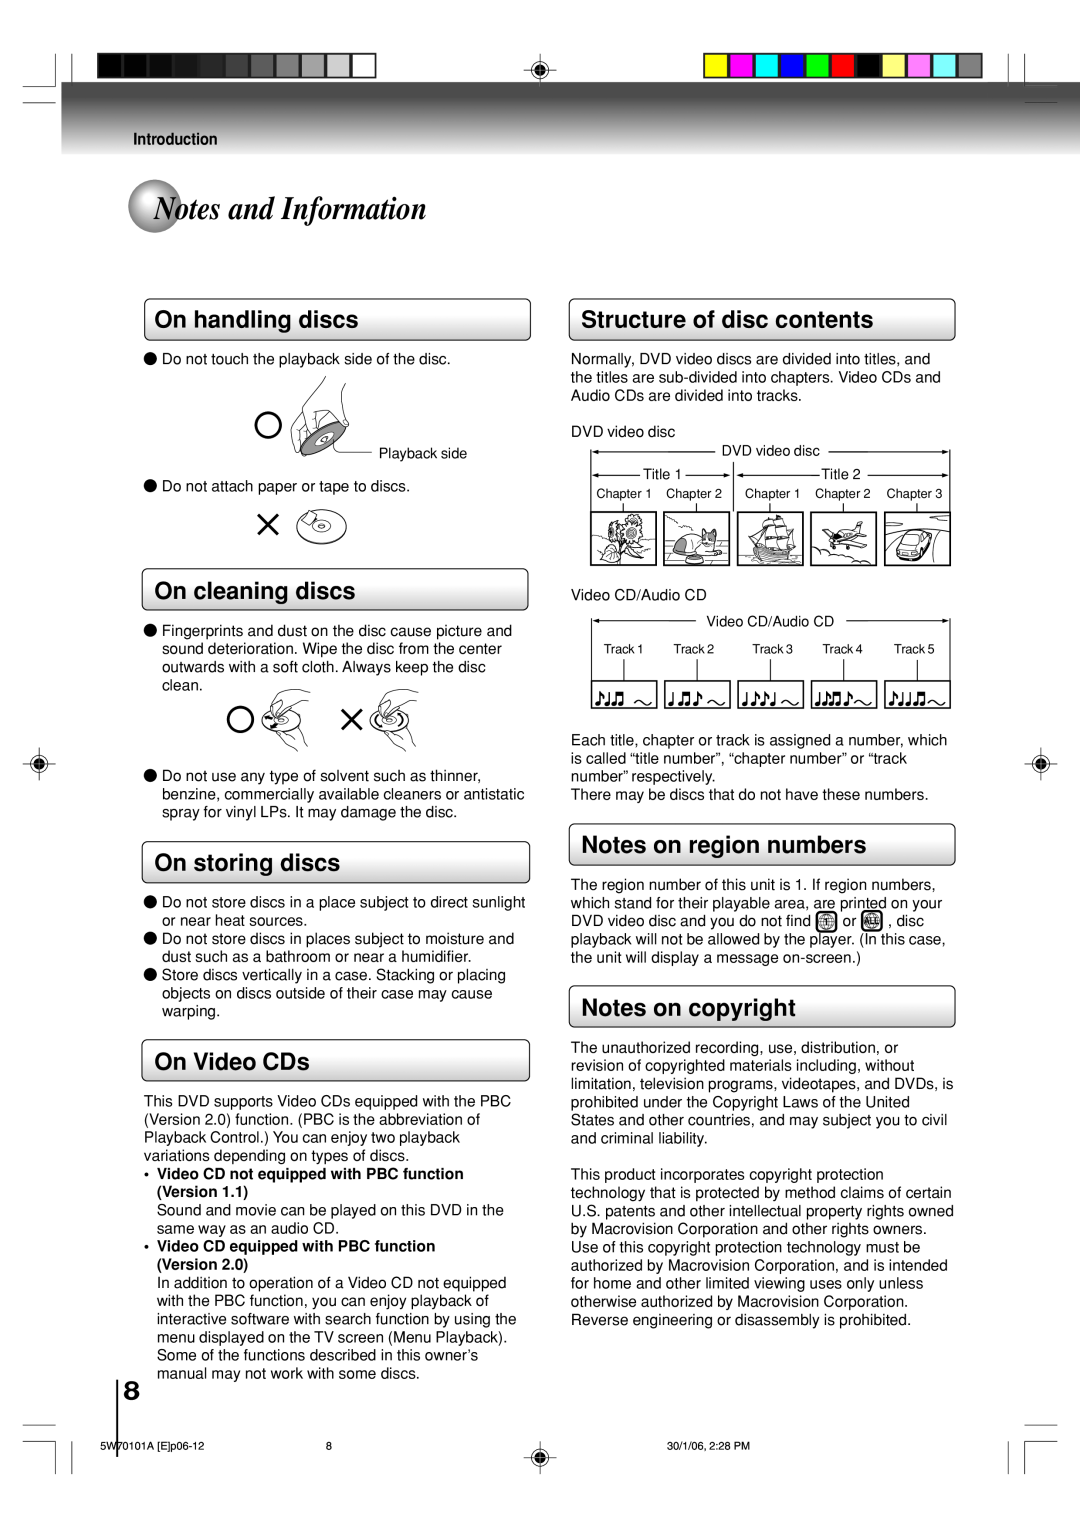 Toshiba MW24F52 Notes and Information, On handling discs, On cleaning discs, On storing discs, On Video CDs, Introduction 